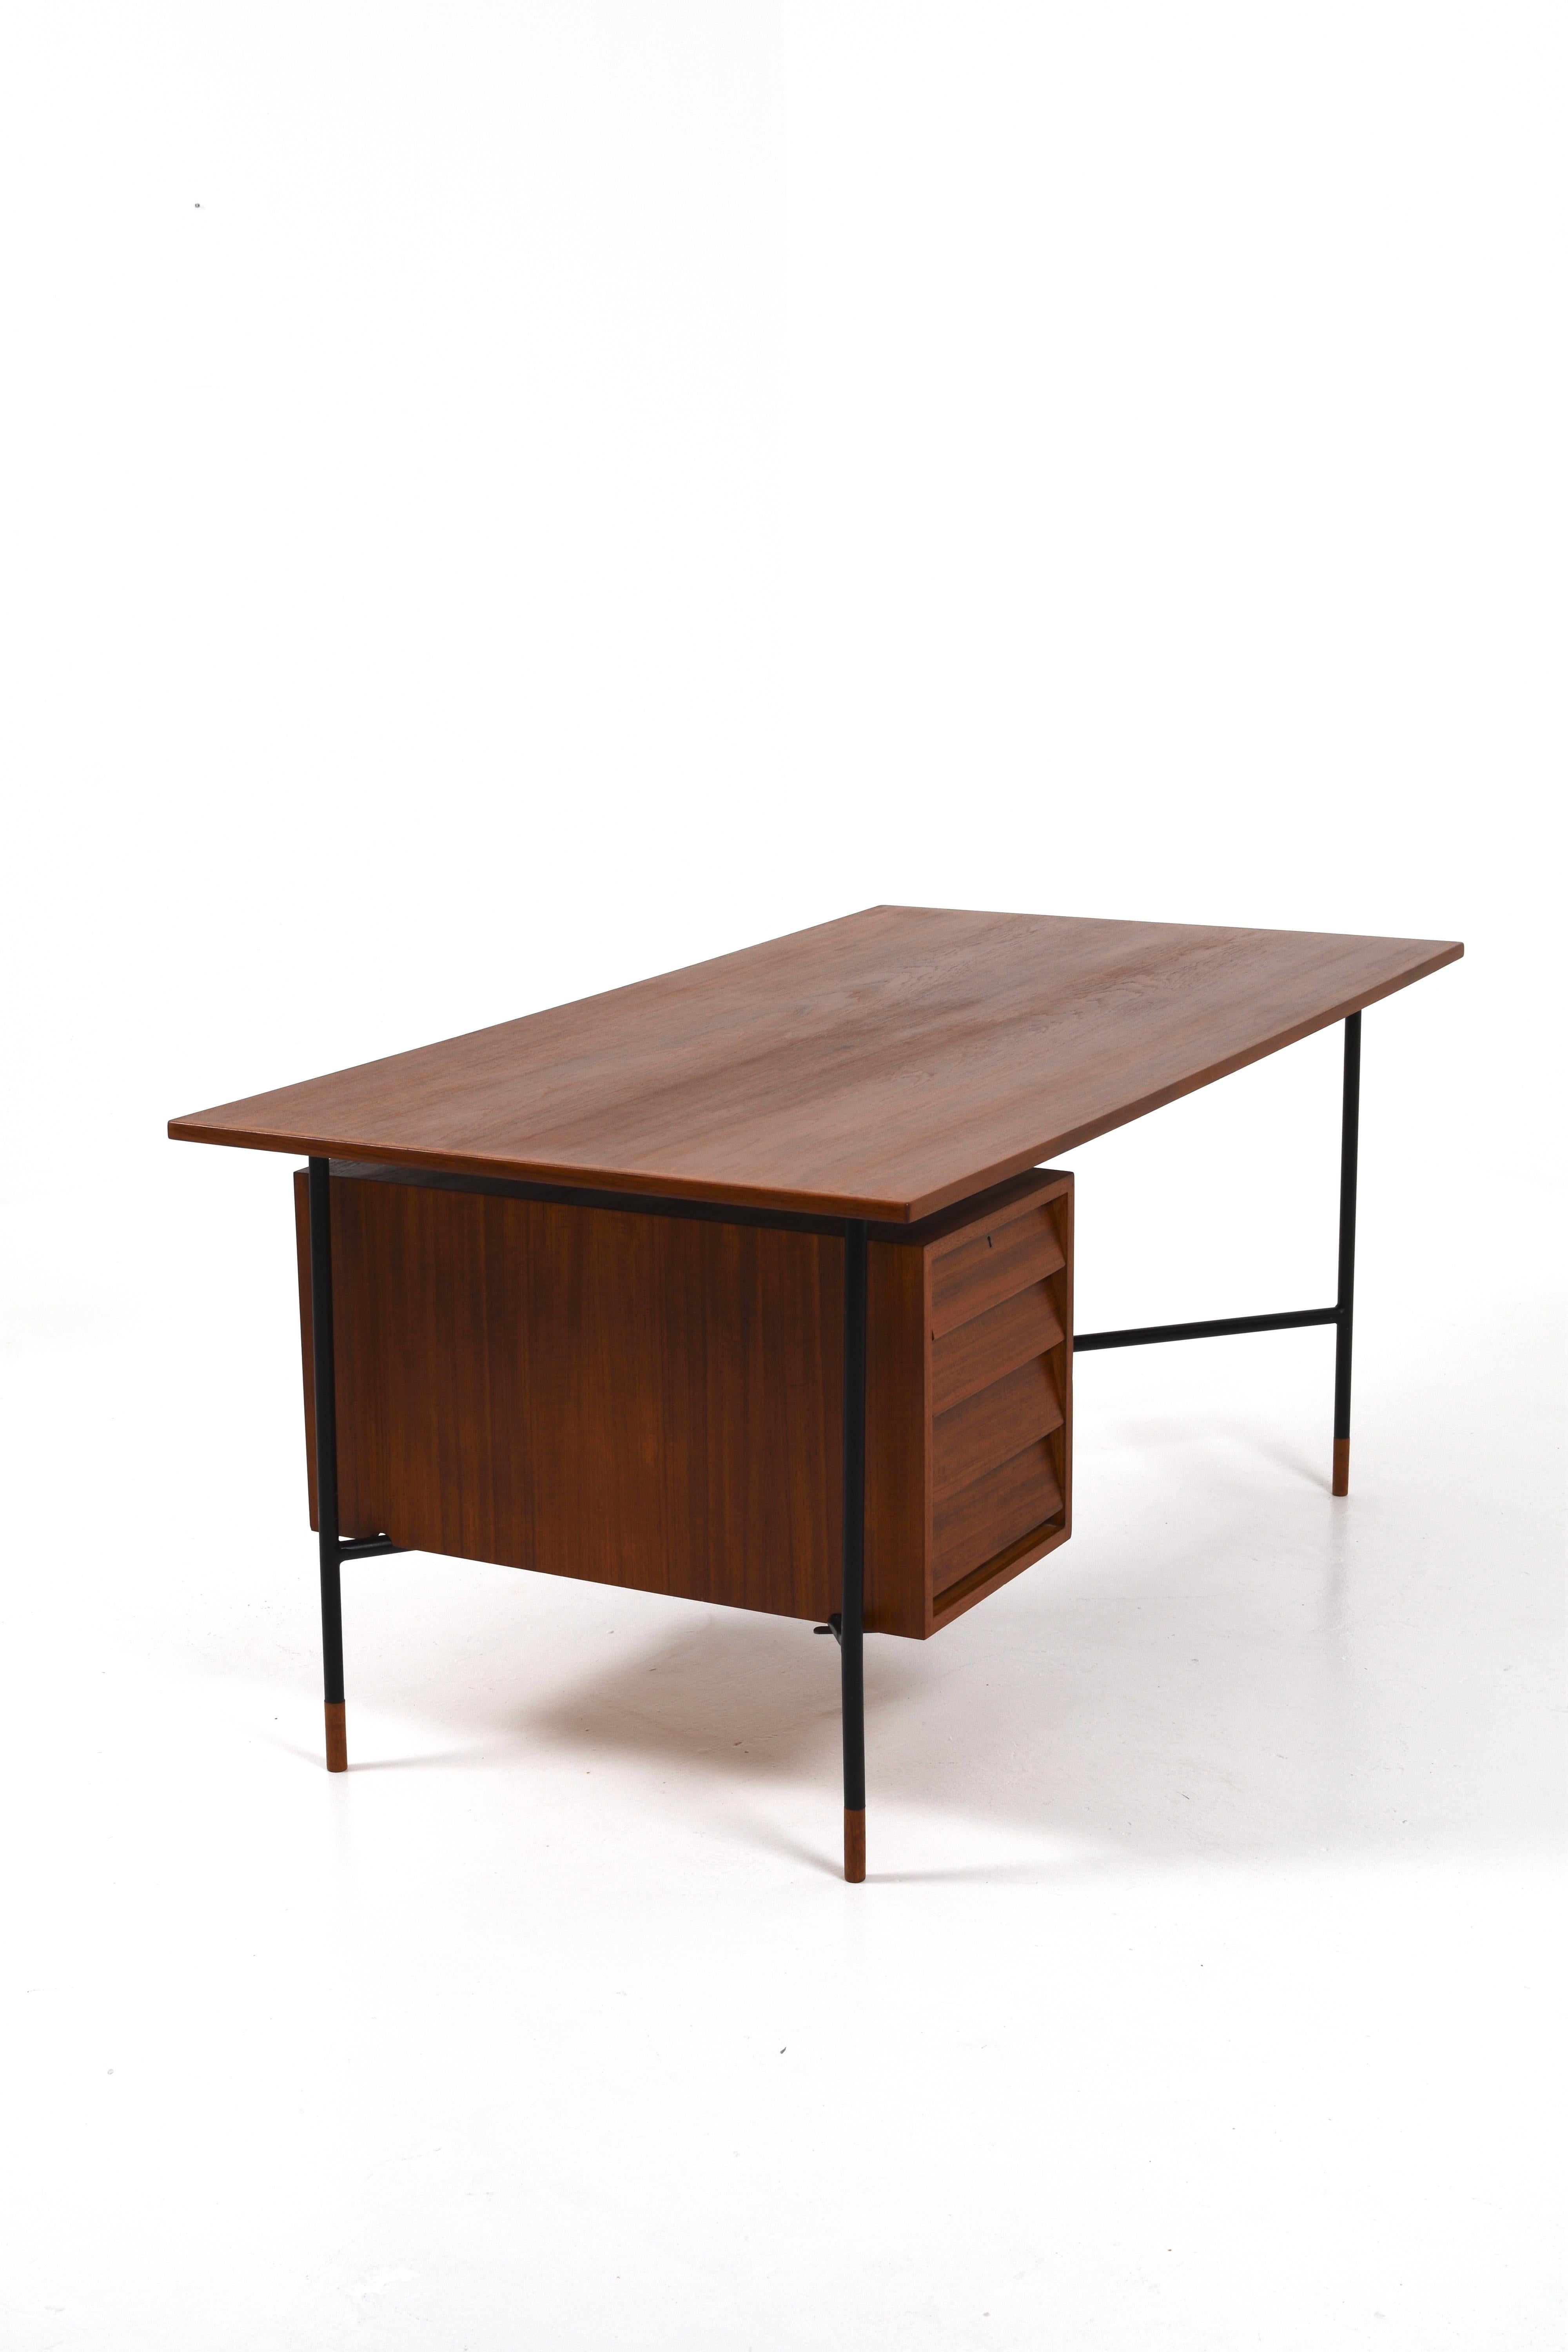 Rare Desk H-55 by Åke Hassbjer in teak and steel base, 1950s For Sale 3